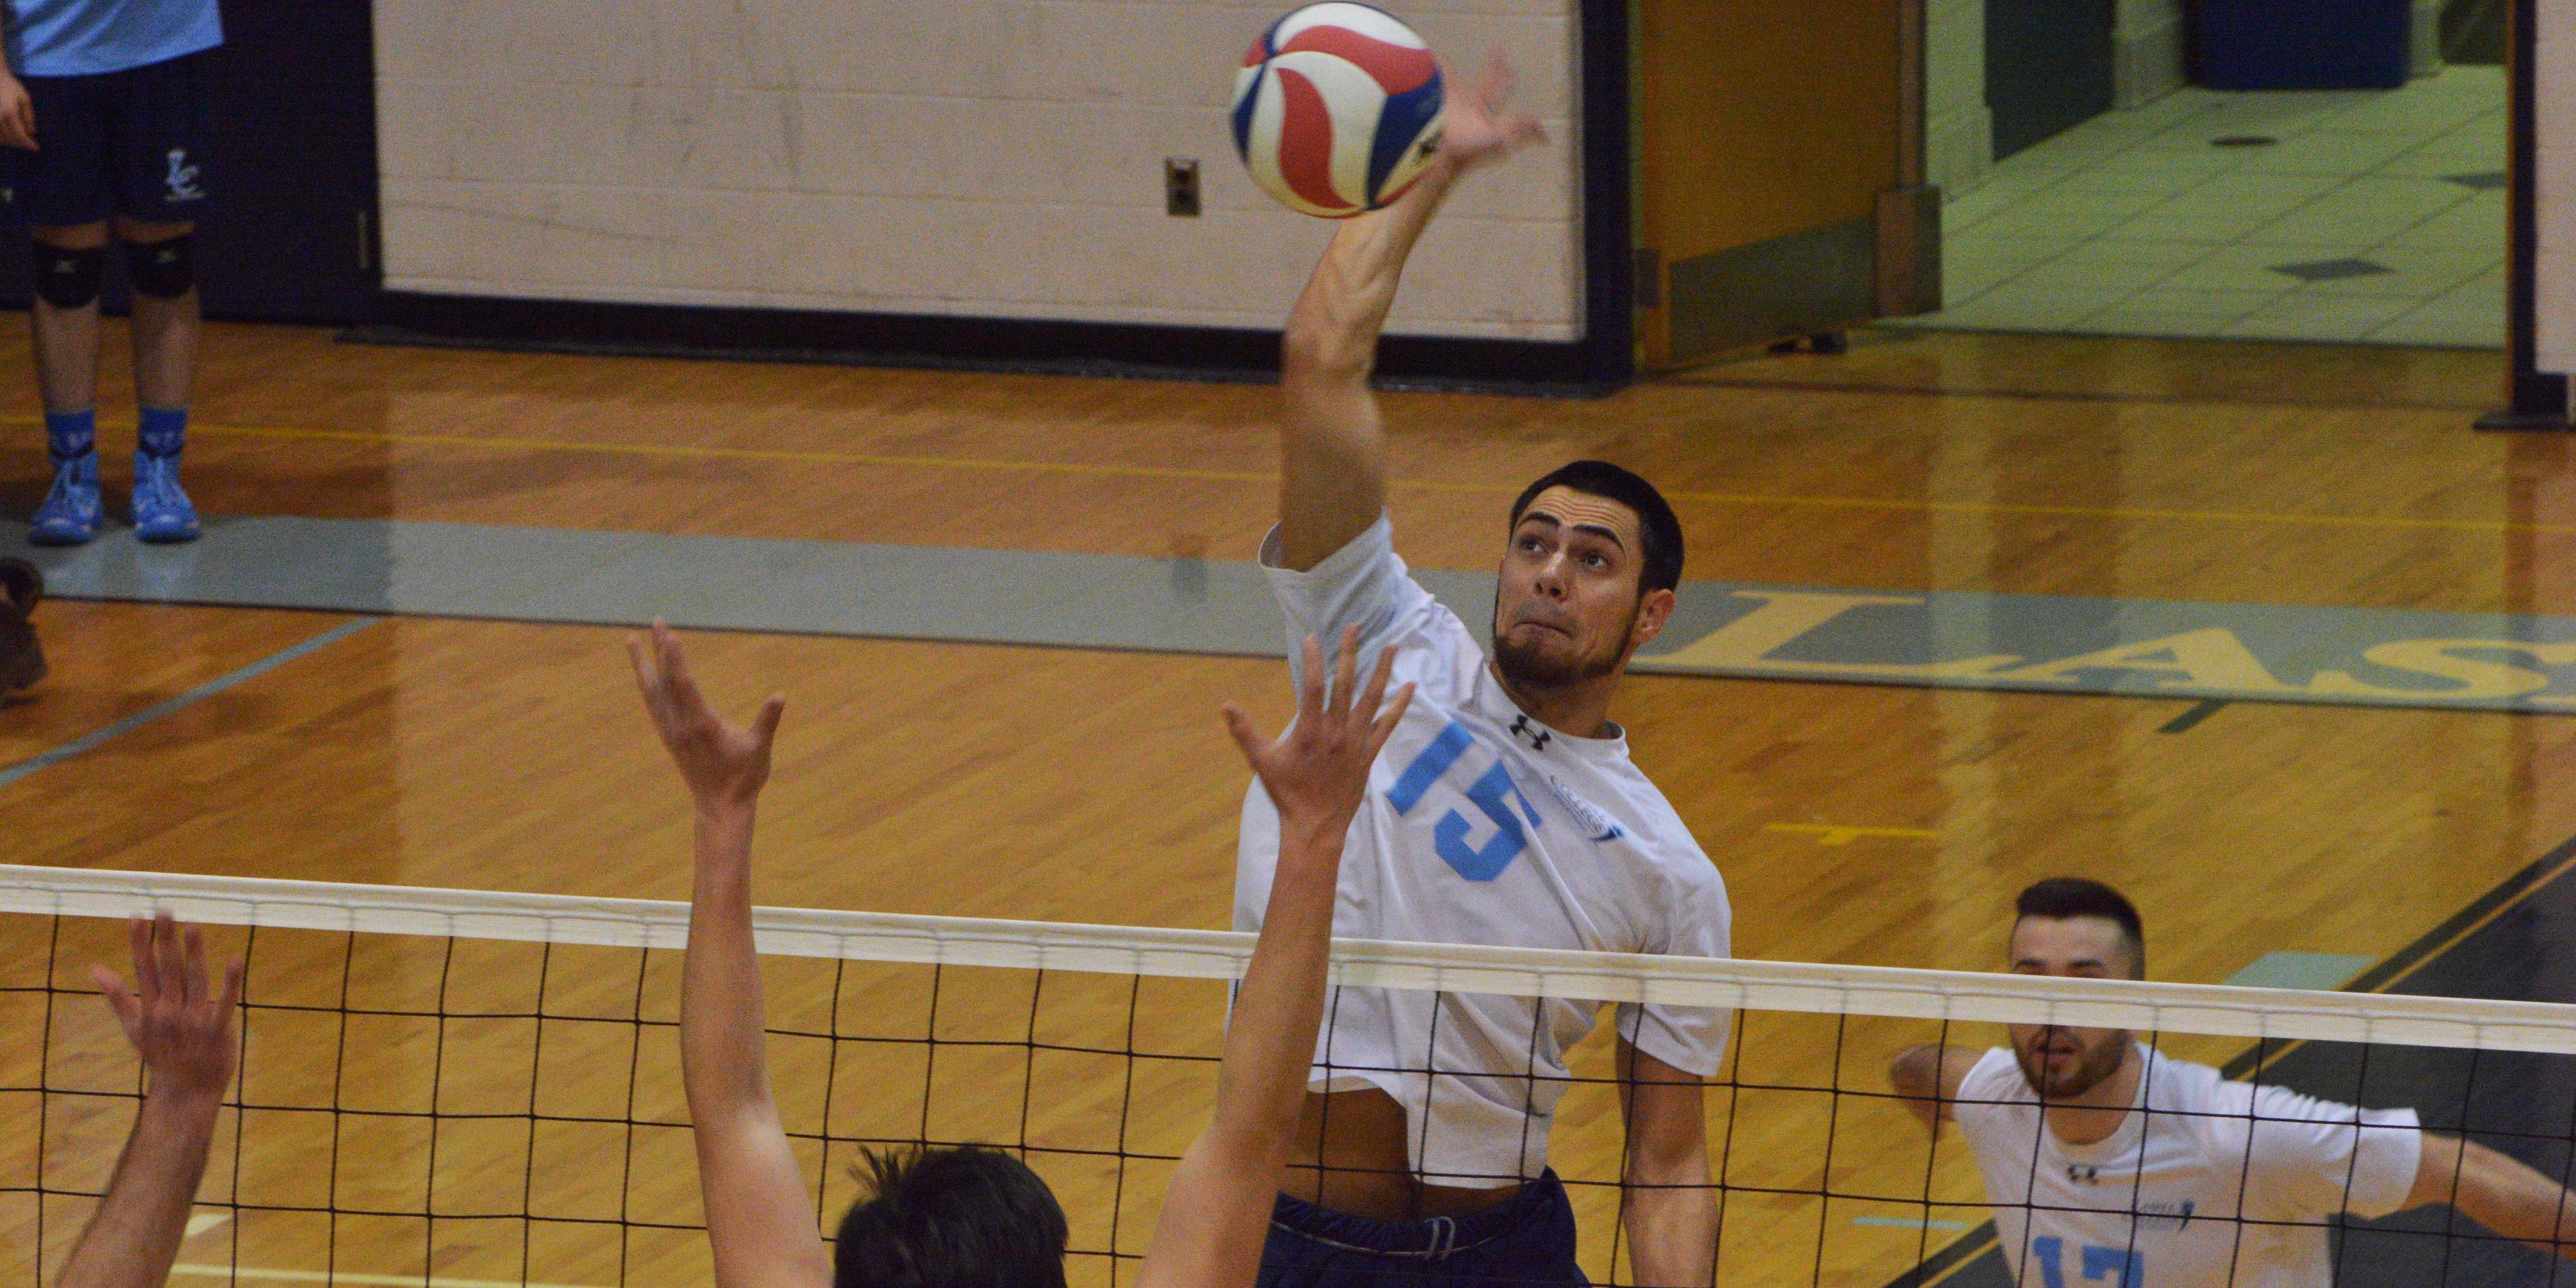 Men’s Volleyball Tops GNAC in 3-1 Victory over Rivier